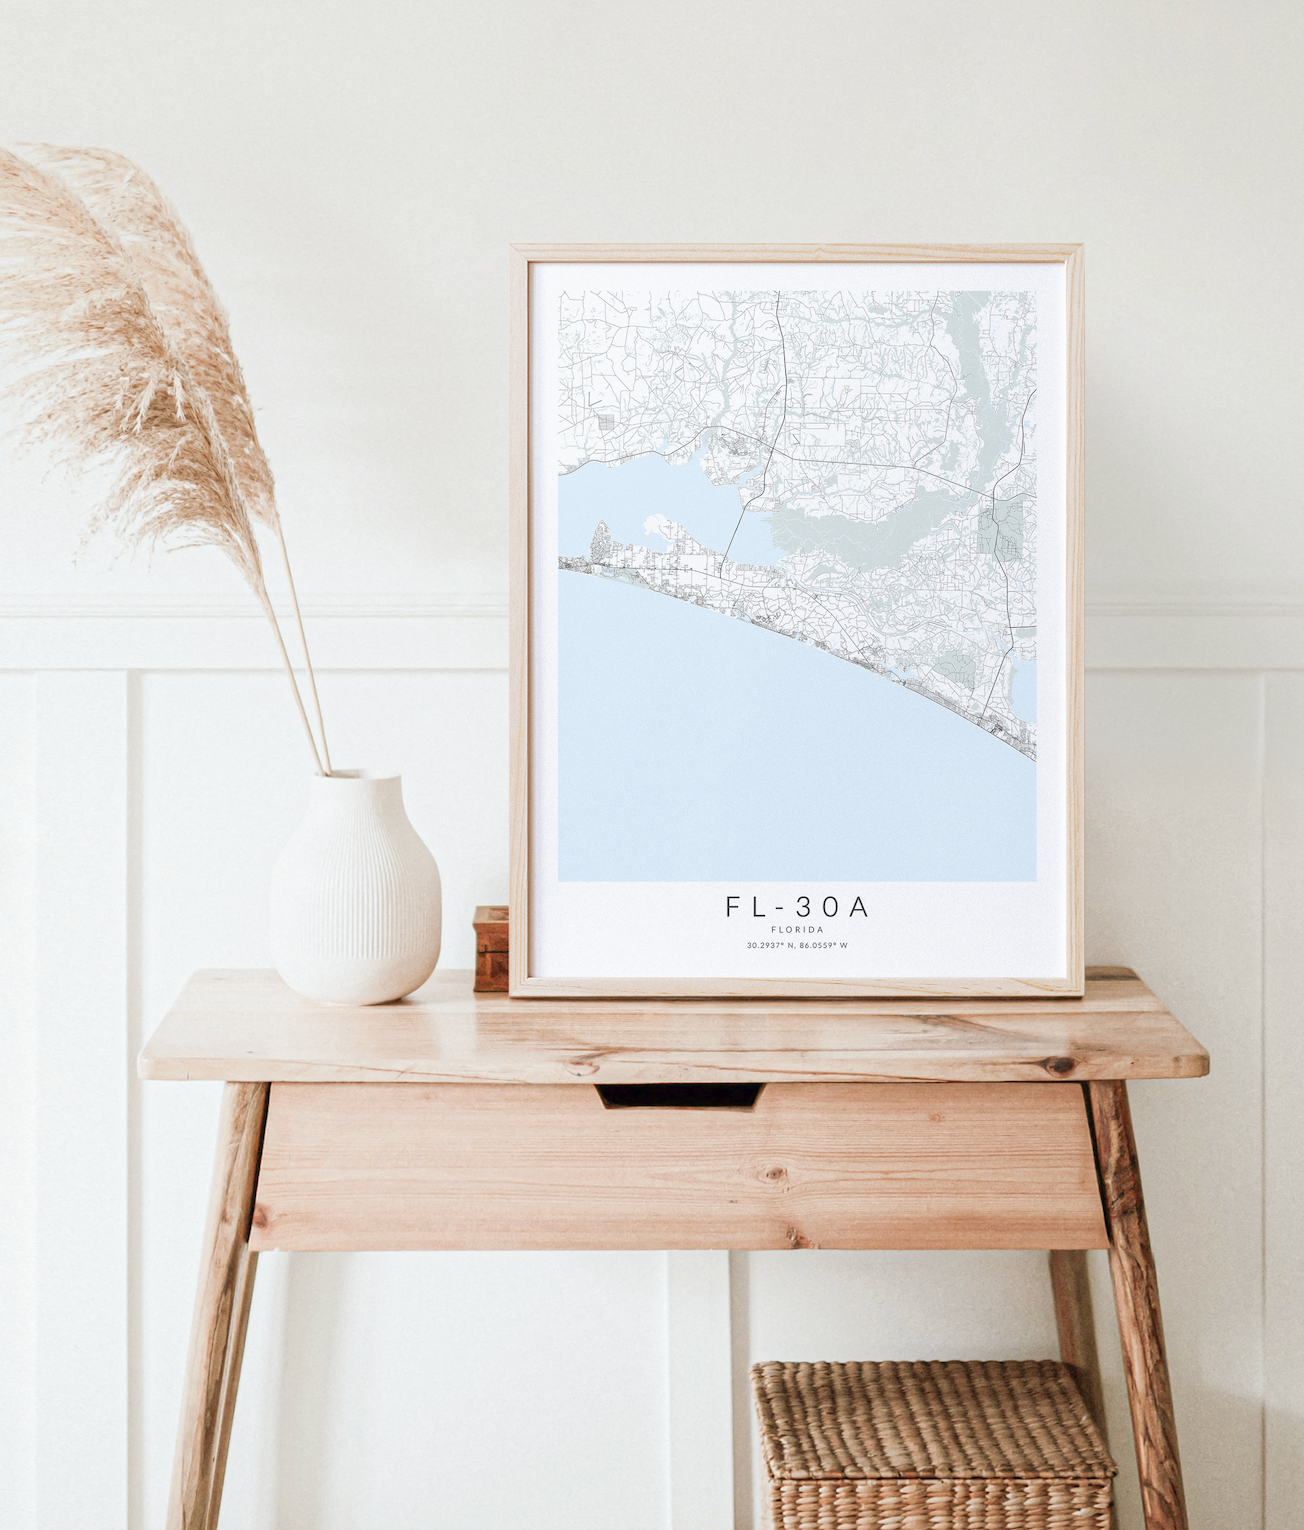 30a florida map print in wood frame on desk